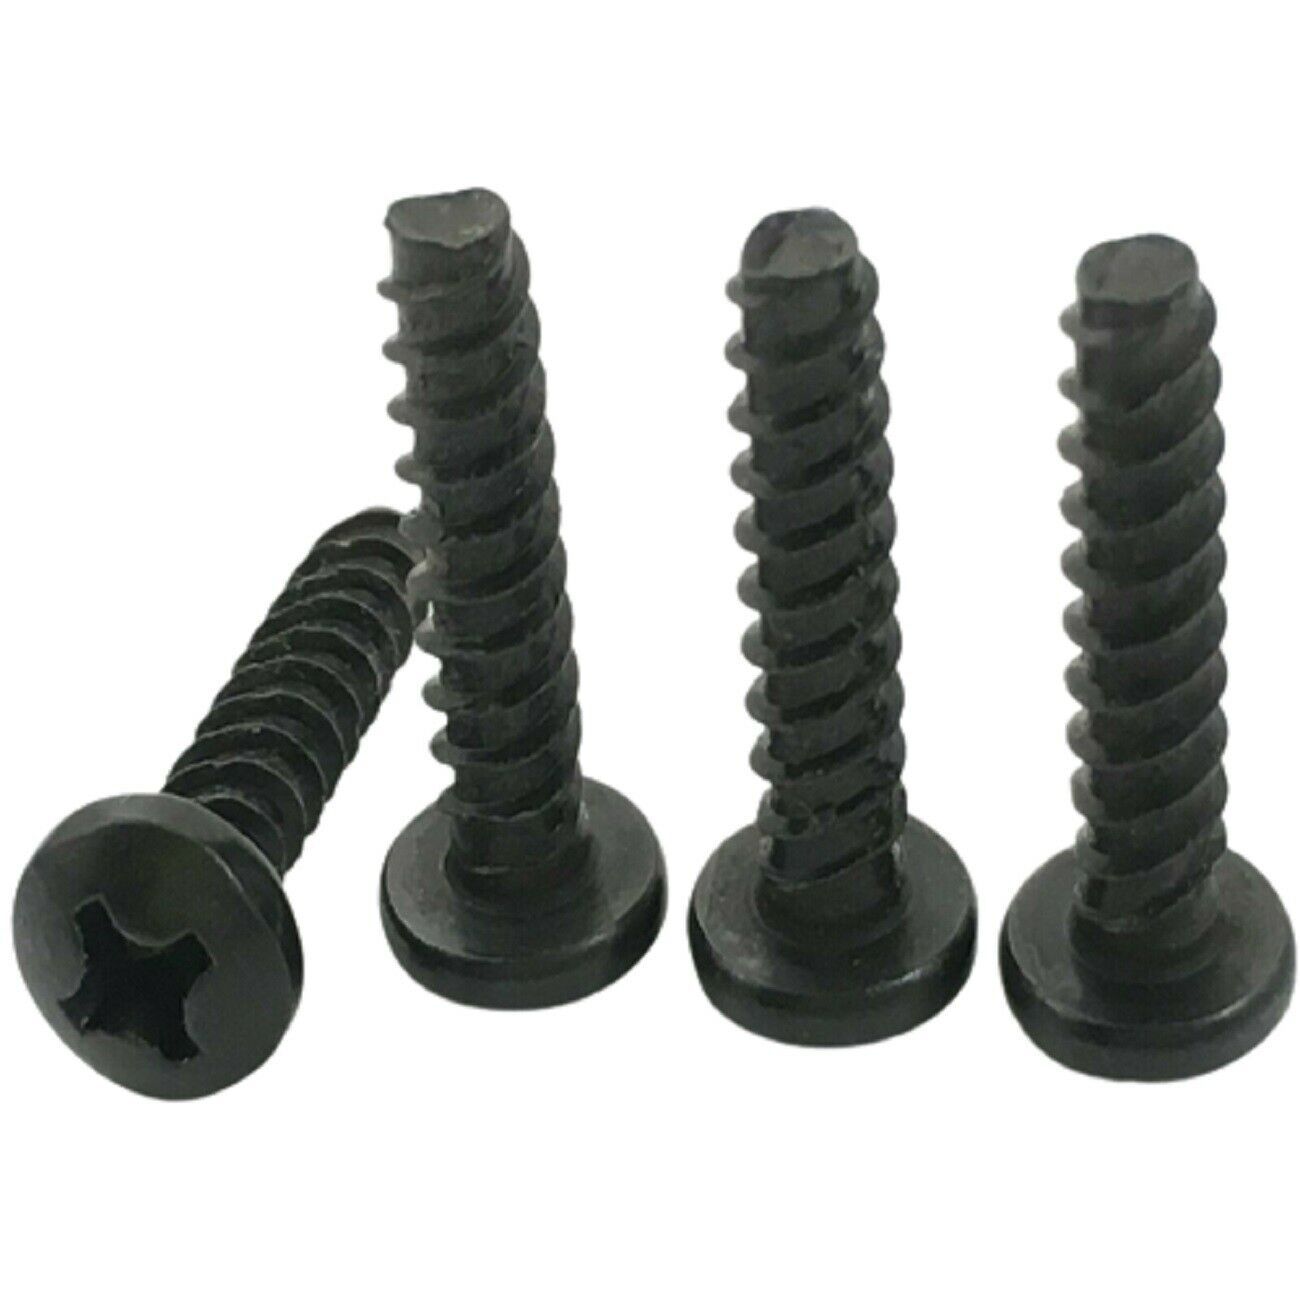 Primary image for LG AAN76411709, AAN76411710 Replacement Screws for TV Stand